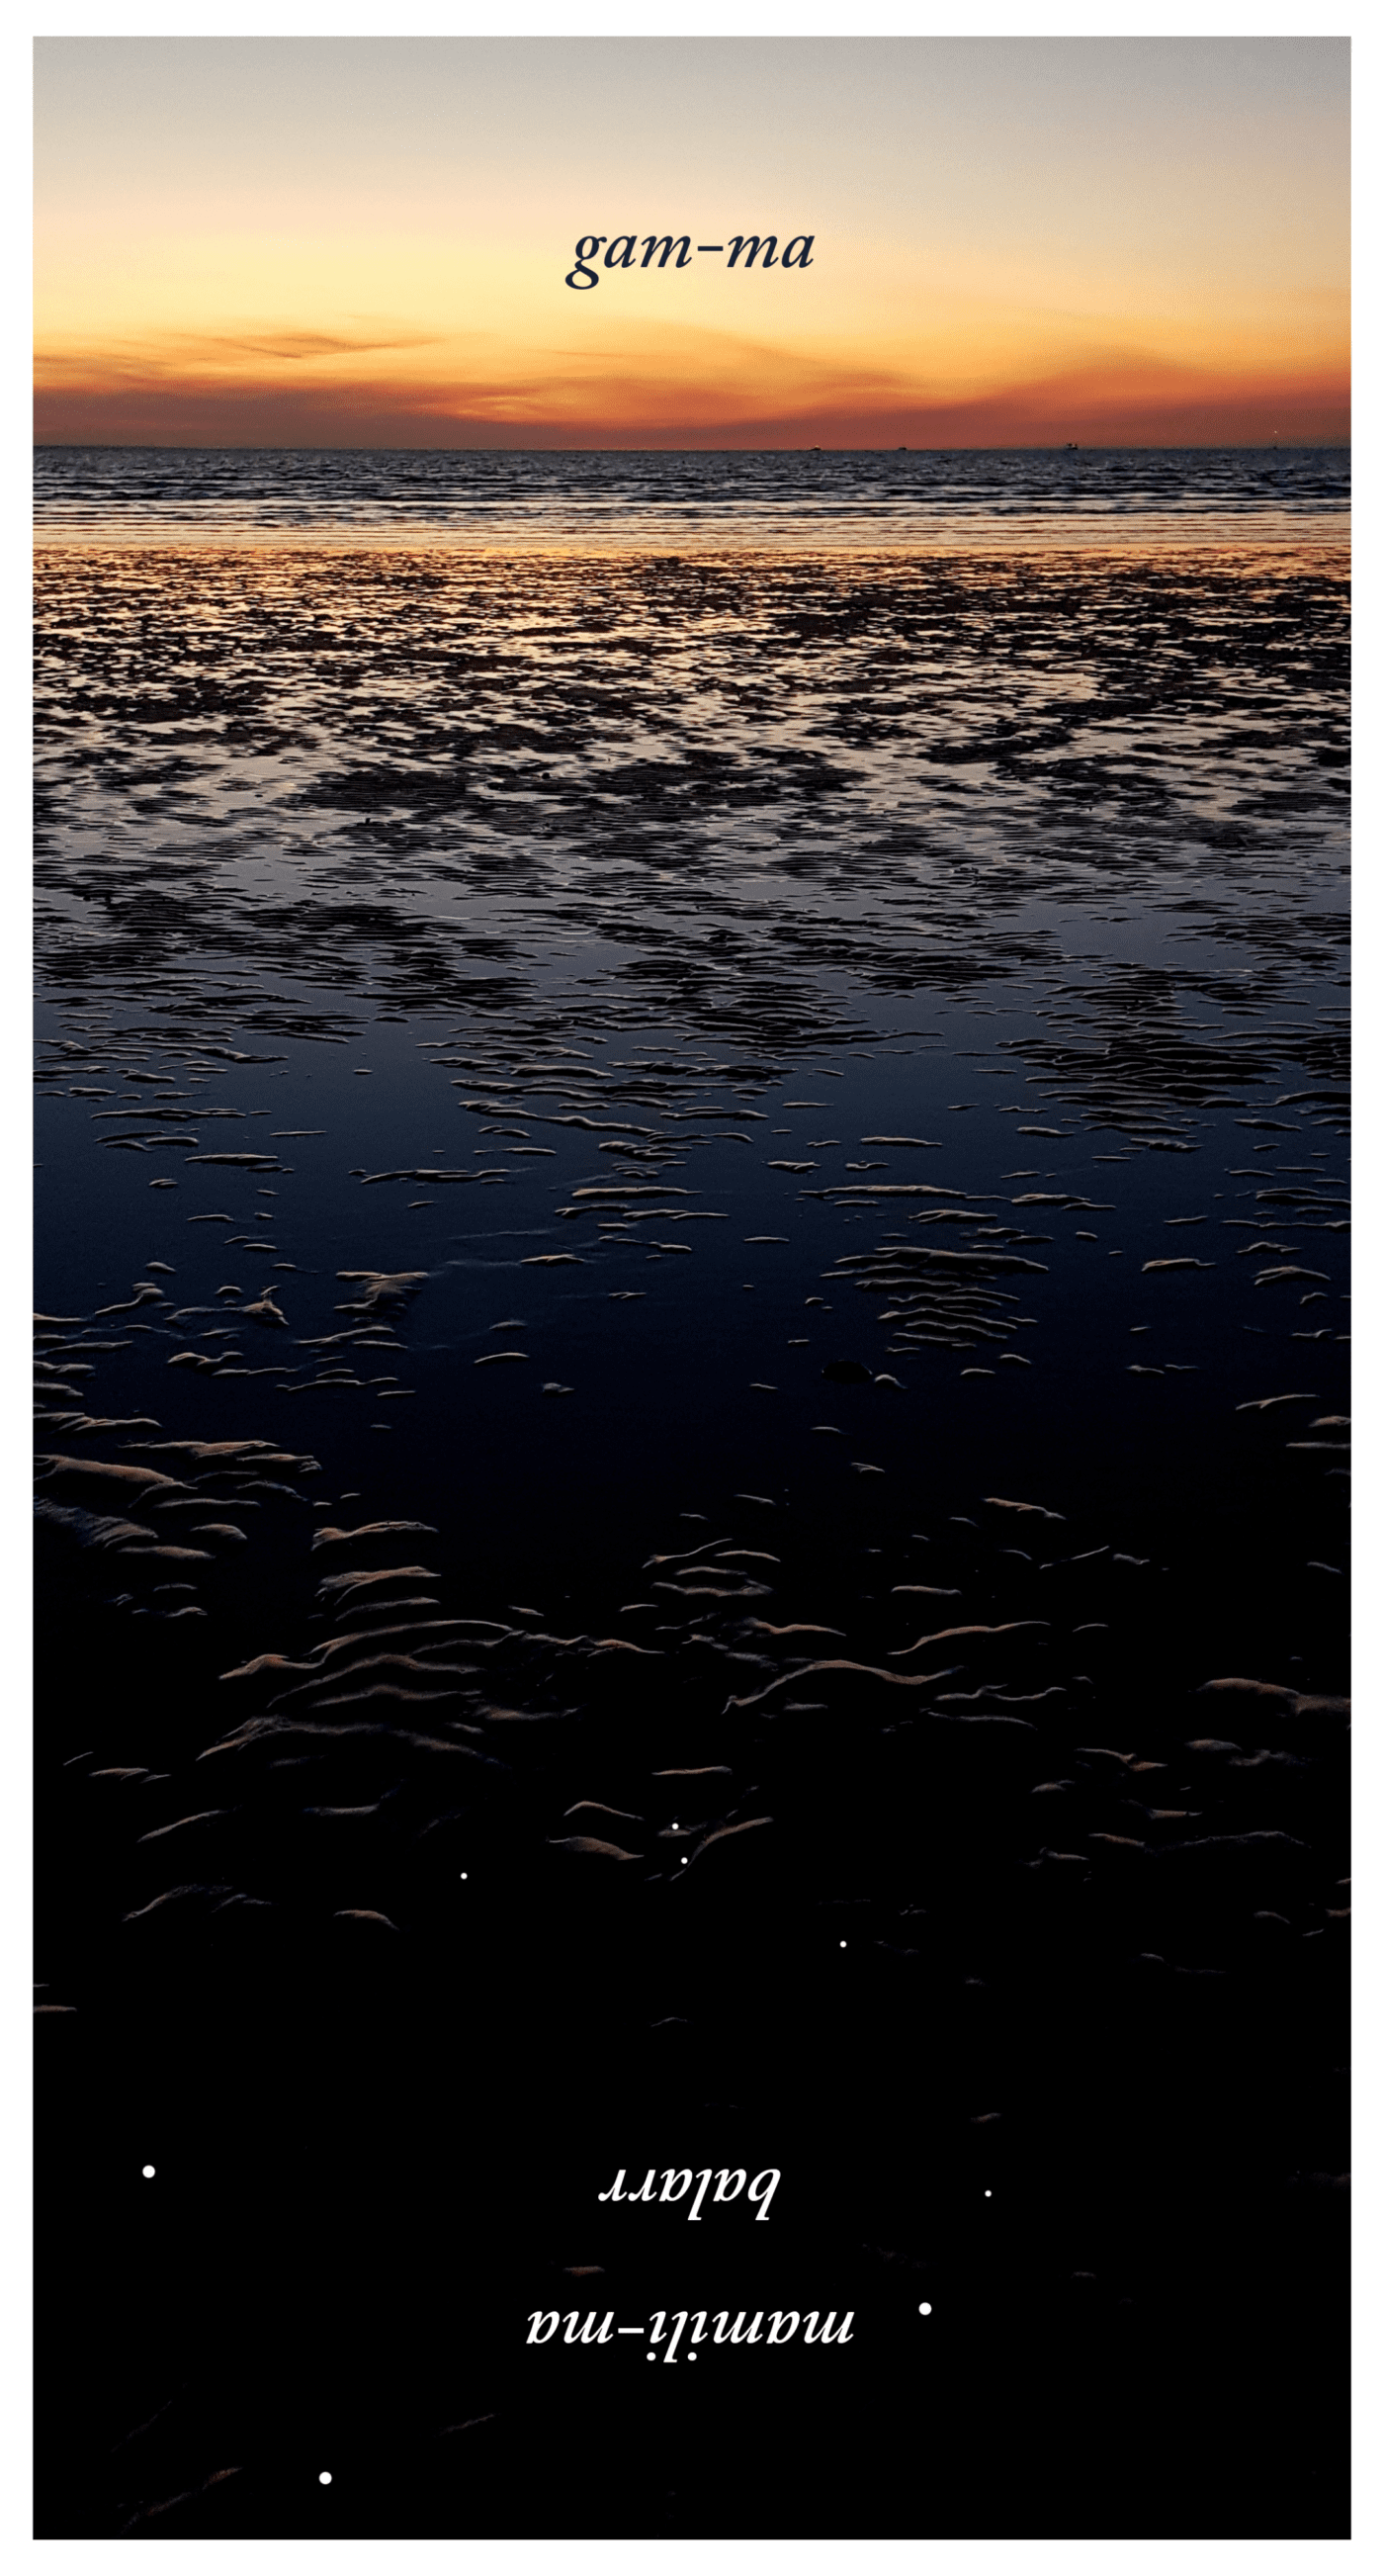 The word 'gam-ma' appears at the top of an image. It is a photograph of the horizon at dusk over mudflats. Stars are superimposed in the dark water. The words 'mamili-ma balarr' appear upside down at the bottom of the image.